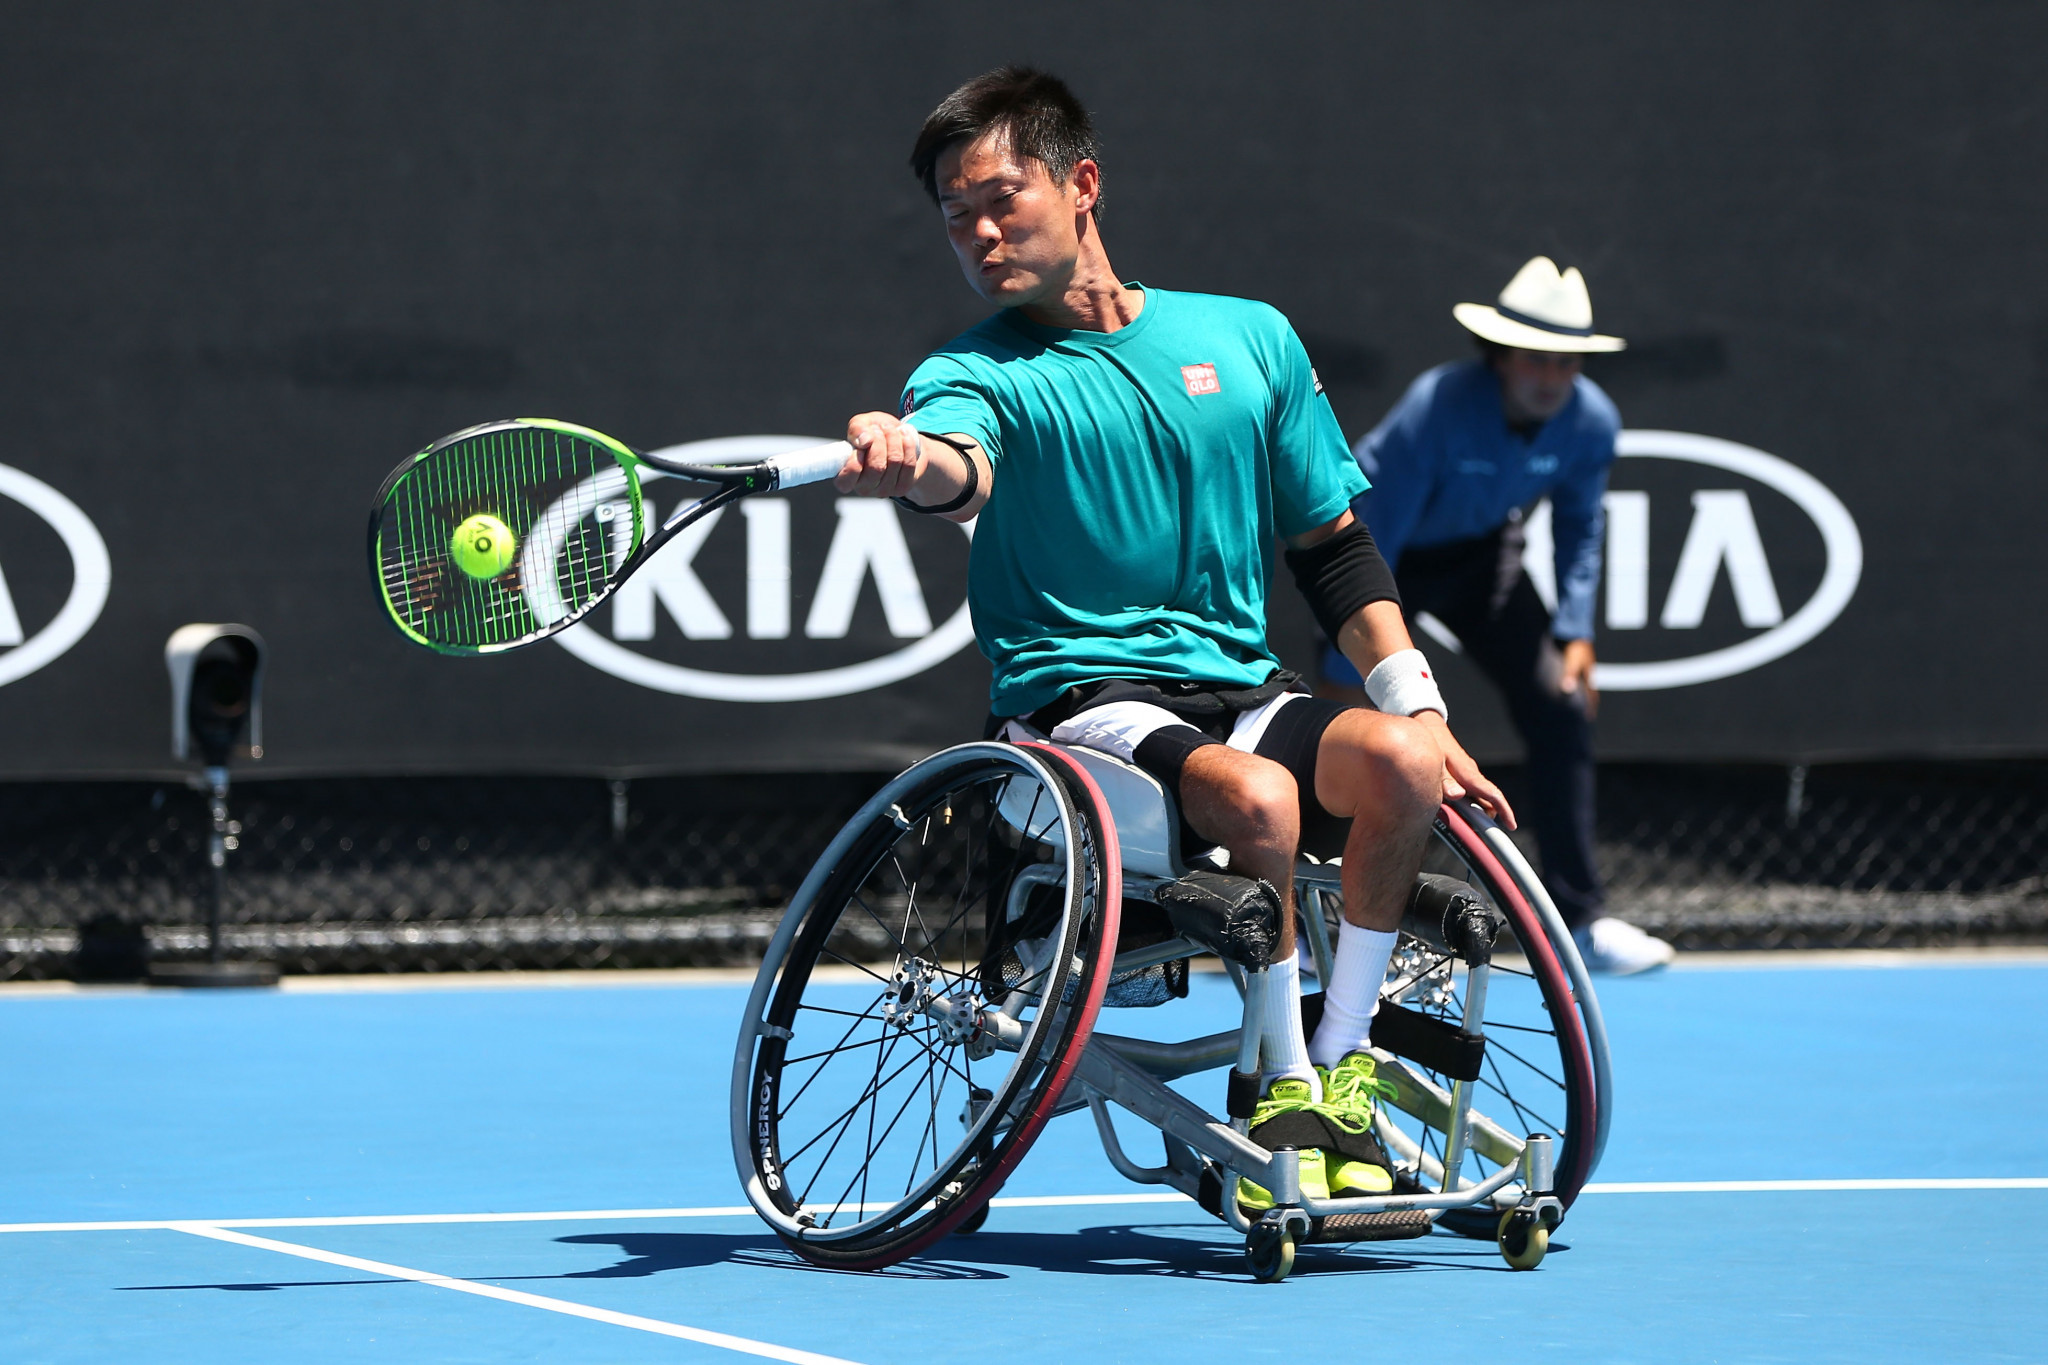 Home favourite Shingo Kunieda of Japan will face Paralympic champion Gordon Reid of Britain in the quarter-finals of the ITF Japan Open ©ITF